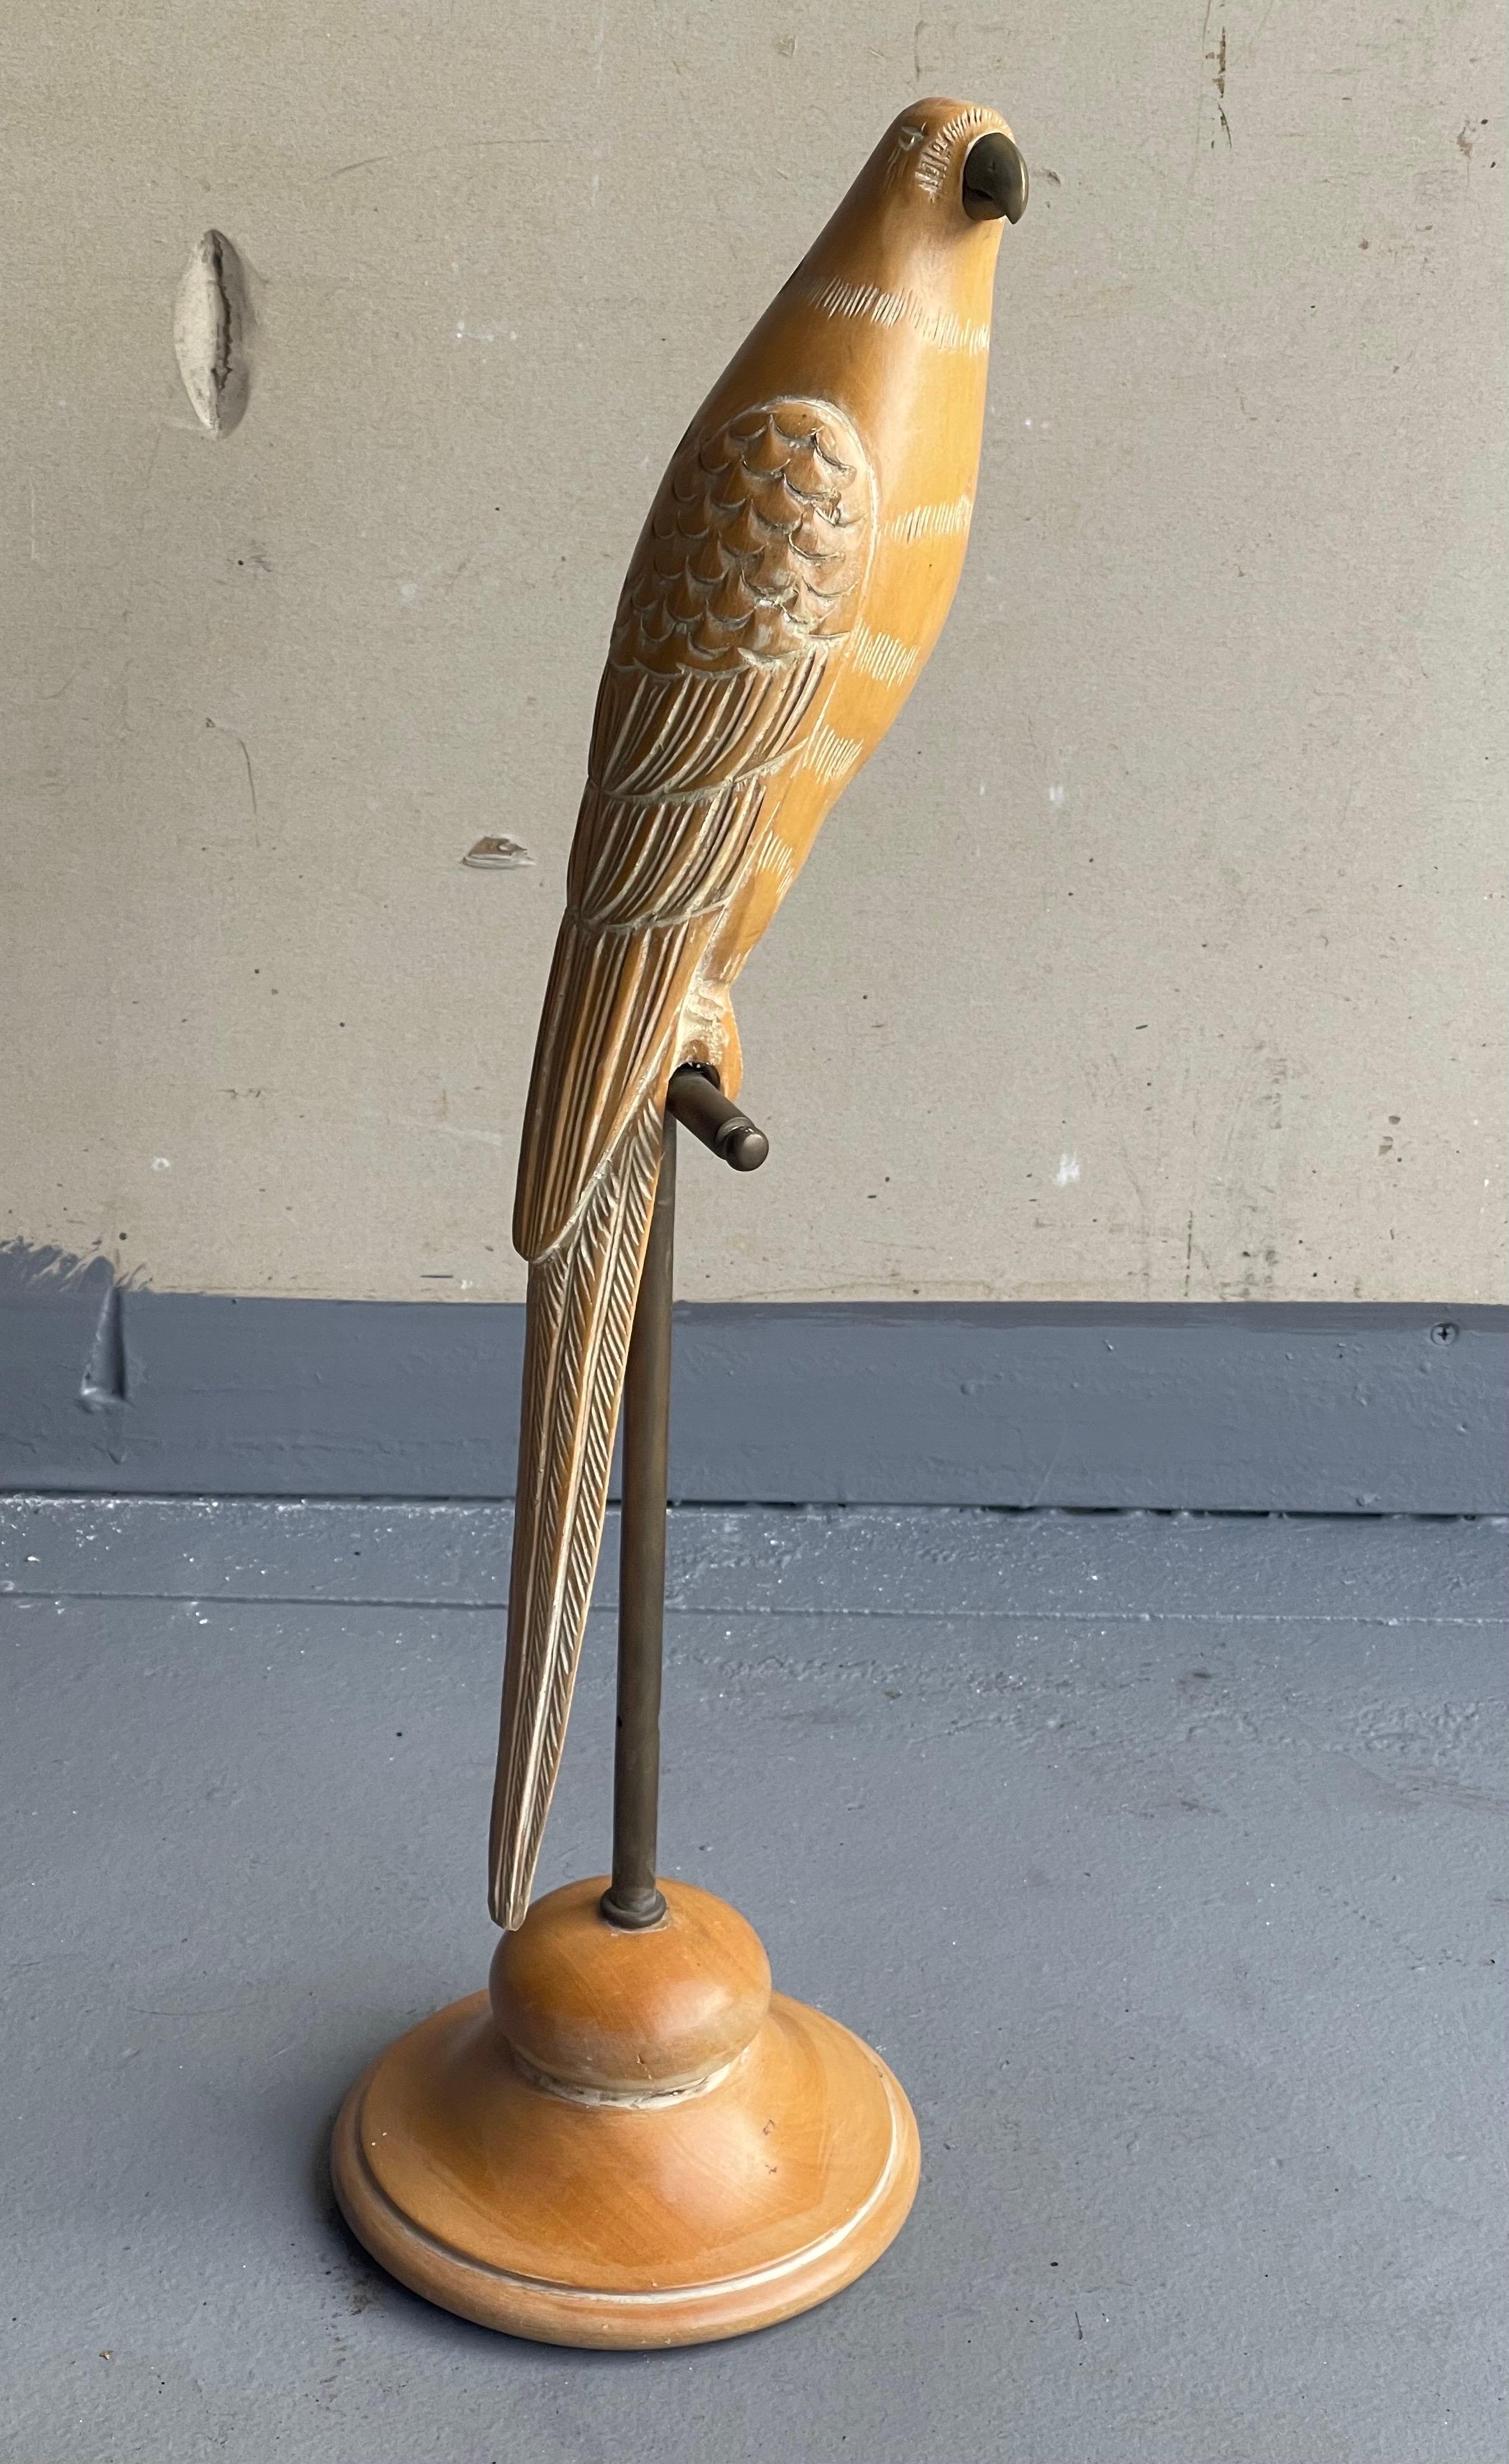 A very cool hand carved knotty pine wood parrot on perch sculpture by Sarreid Ltd., circa 1970s. The sculpture has a white wash overlay finish and sits on a brass rod; the piece is in very good condition and was made in Spain. It measures 6.25